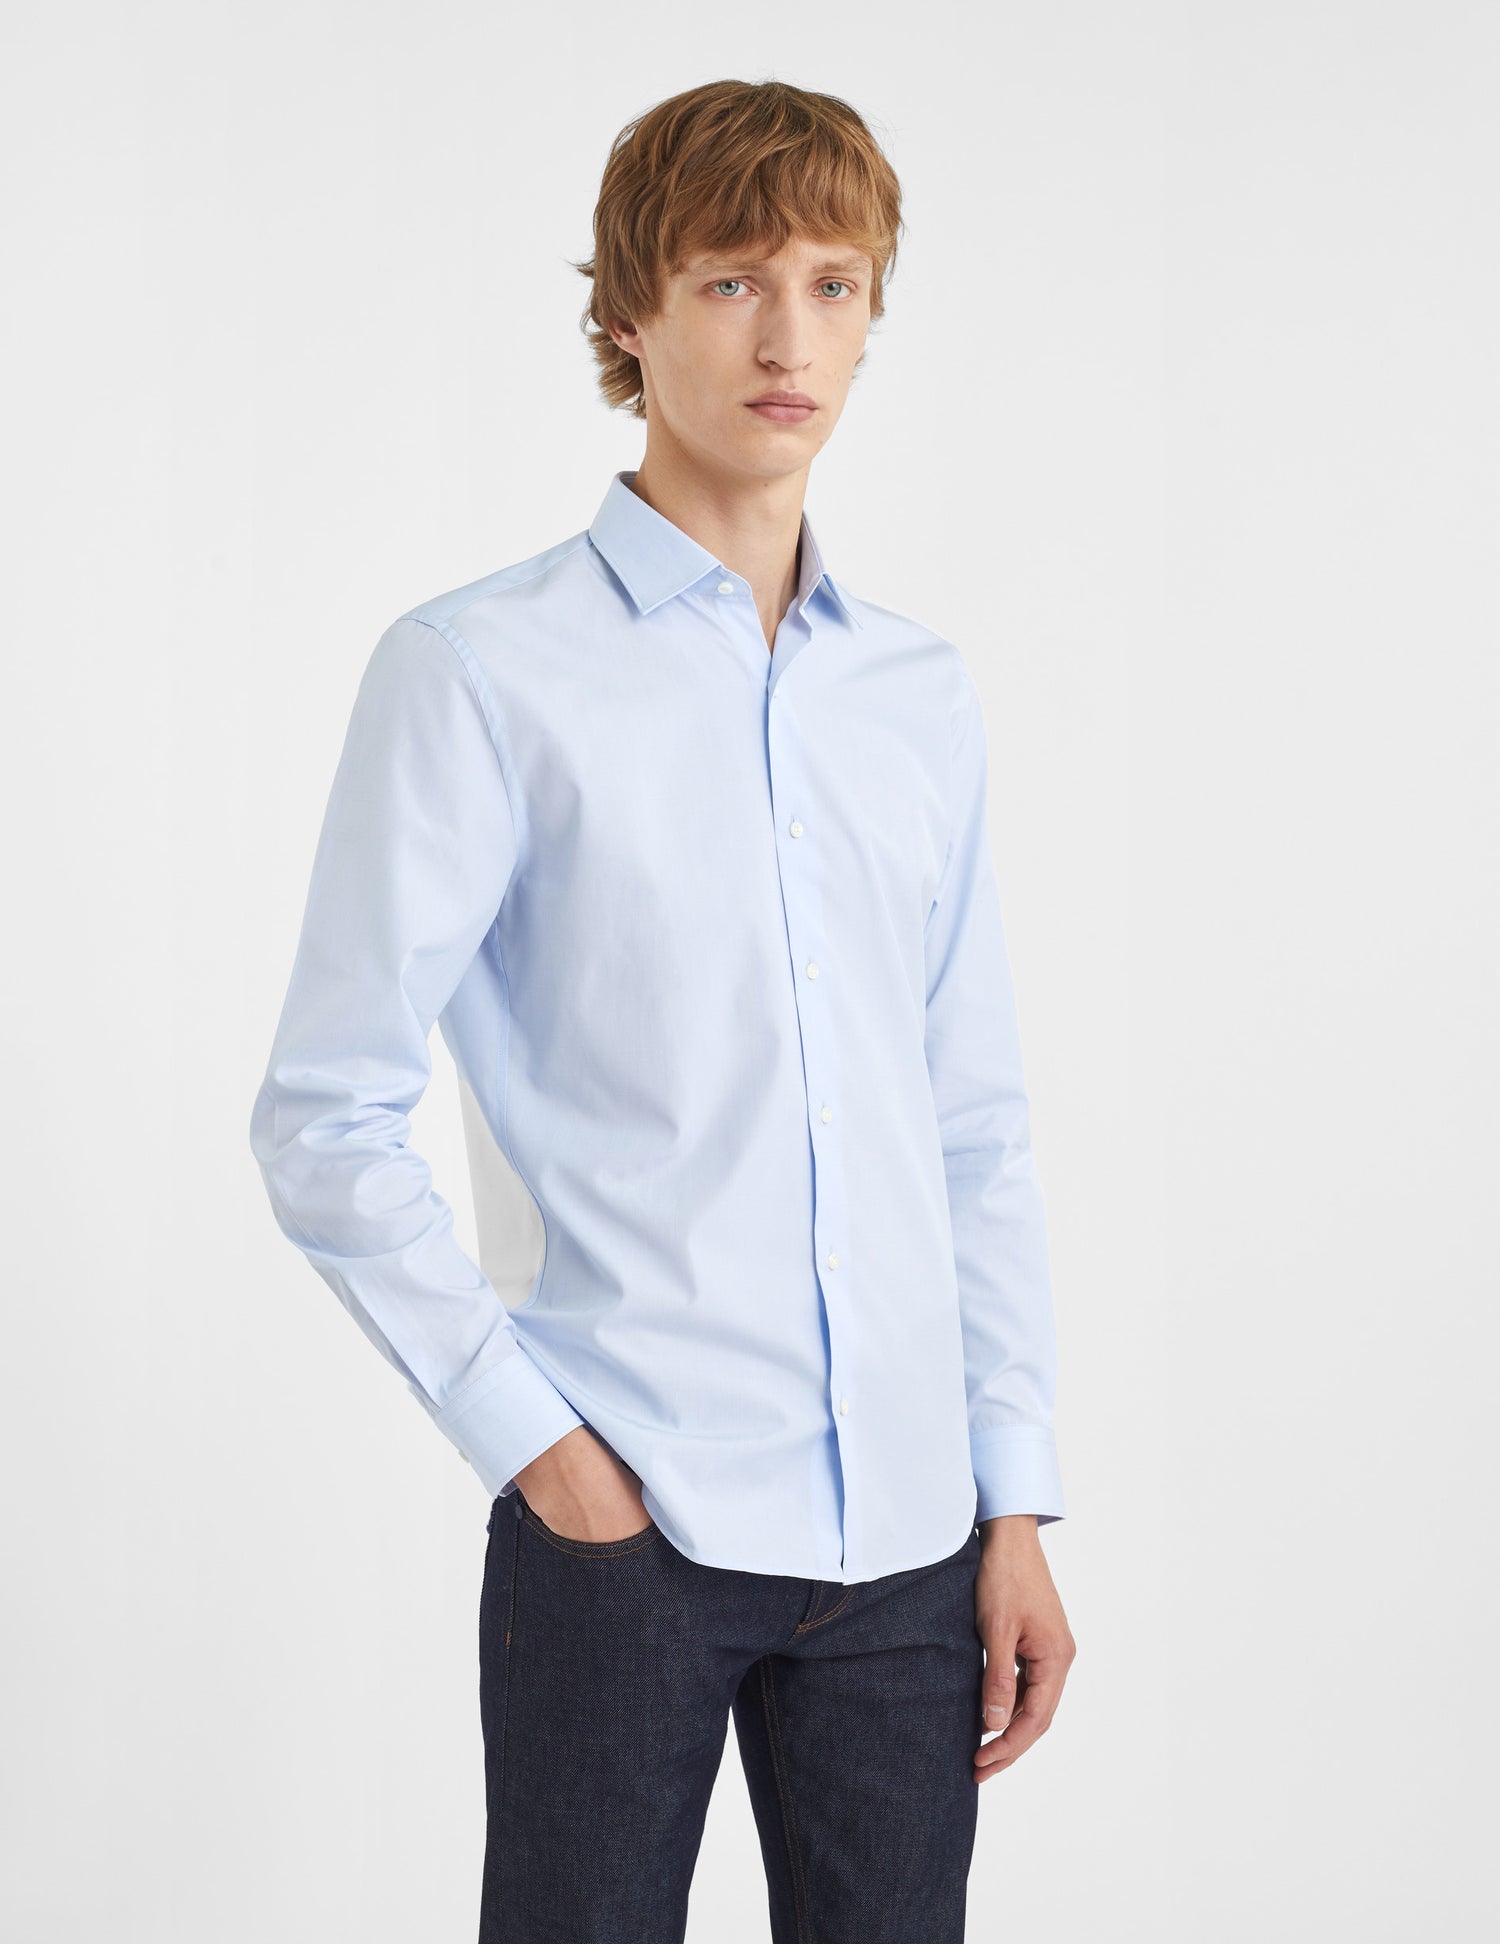 Fitted blue shirt - Wire to wire - Figaret Collar#3